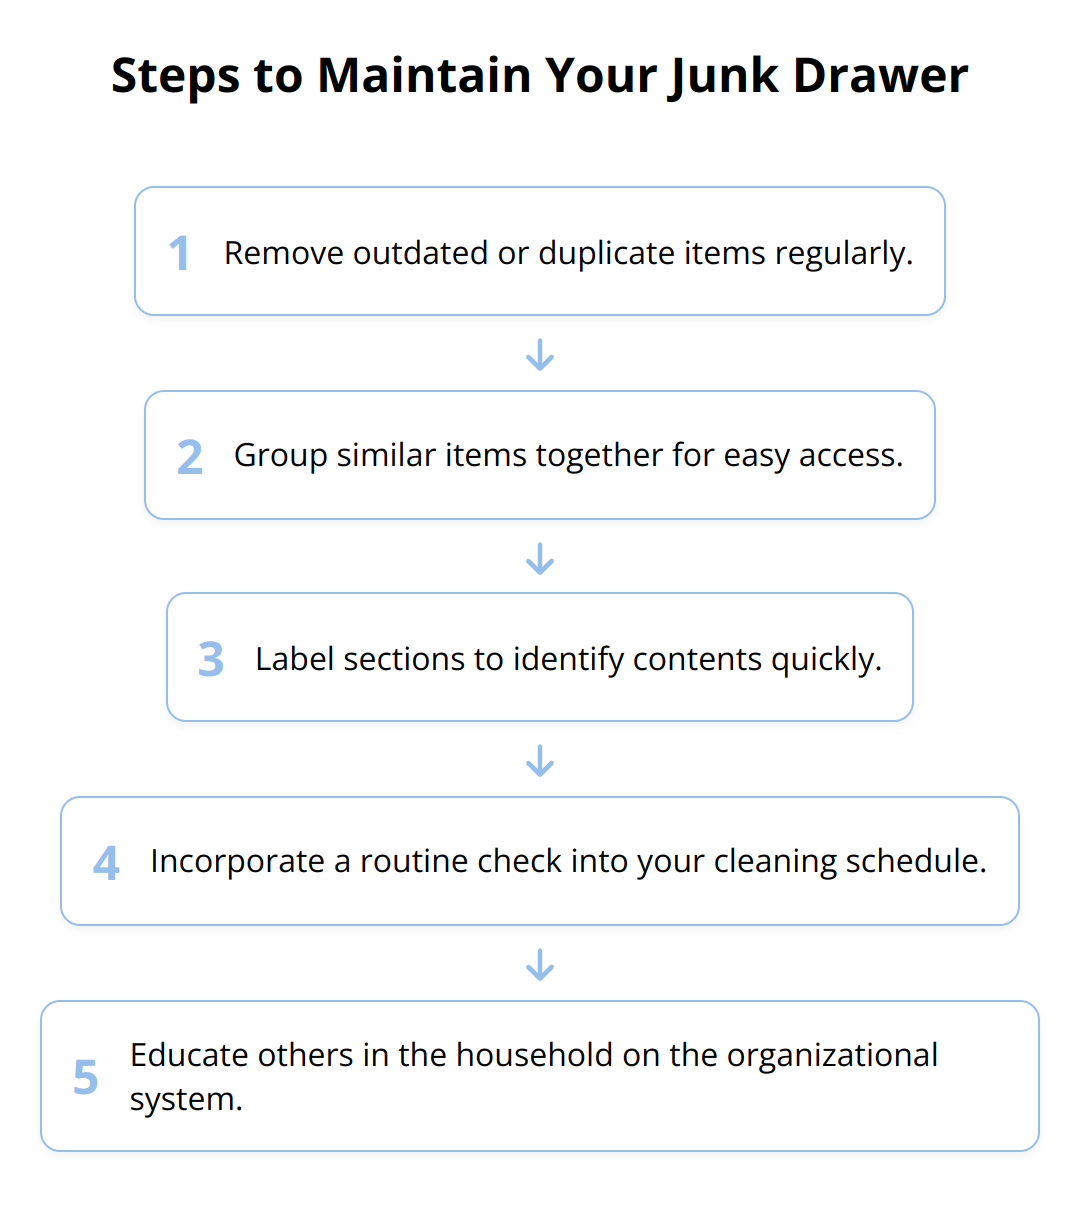 Flow Chart - Steps to Maintain Your Junk Drawer